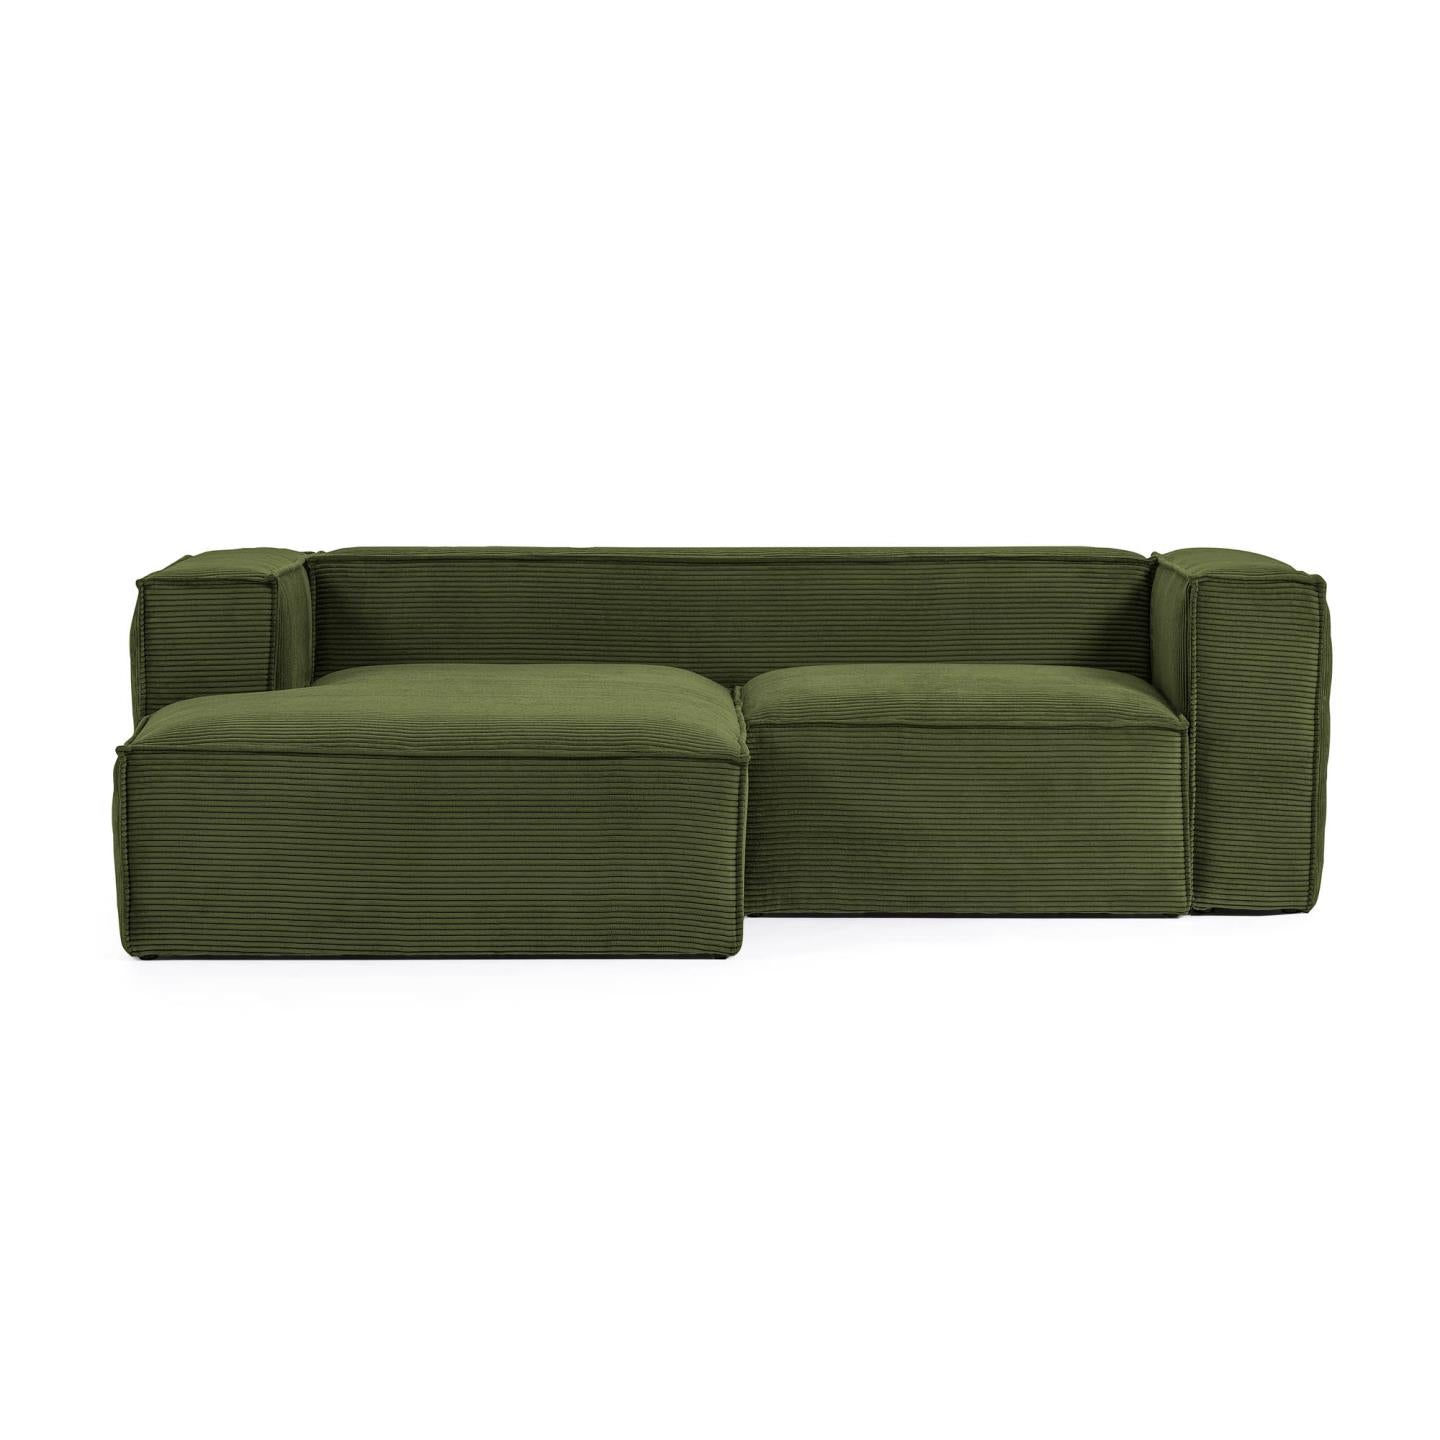 Blok 2 seater sofa with left side chaise longue in green wide seam corduroy, 240 cm